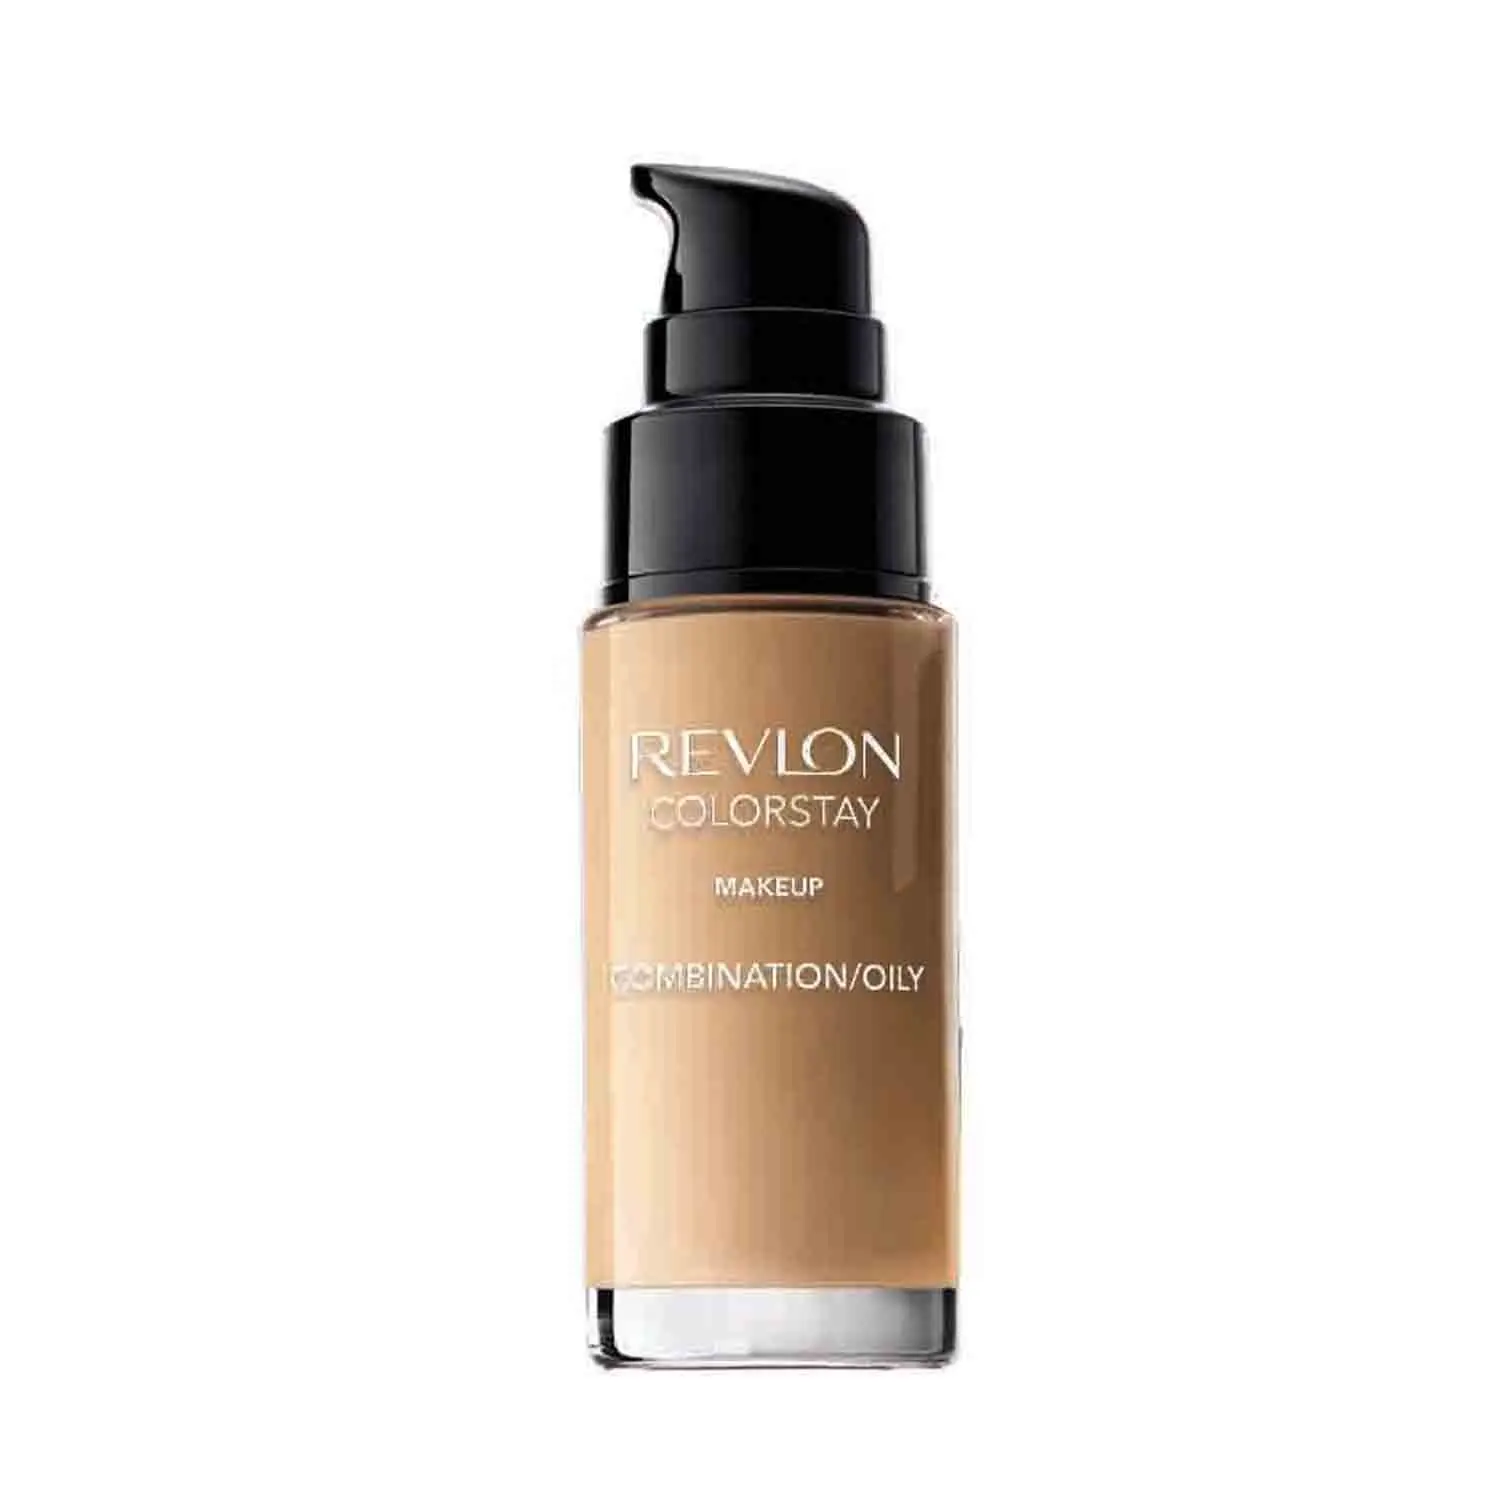 Revlon ColorStay Makeup for Combination / Oily Skin - Natural Tan